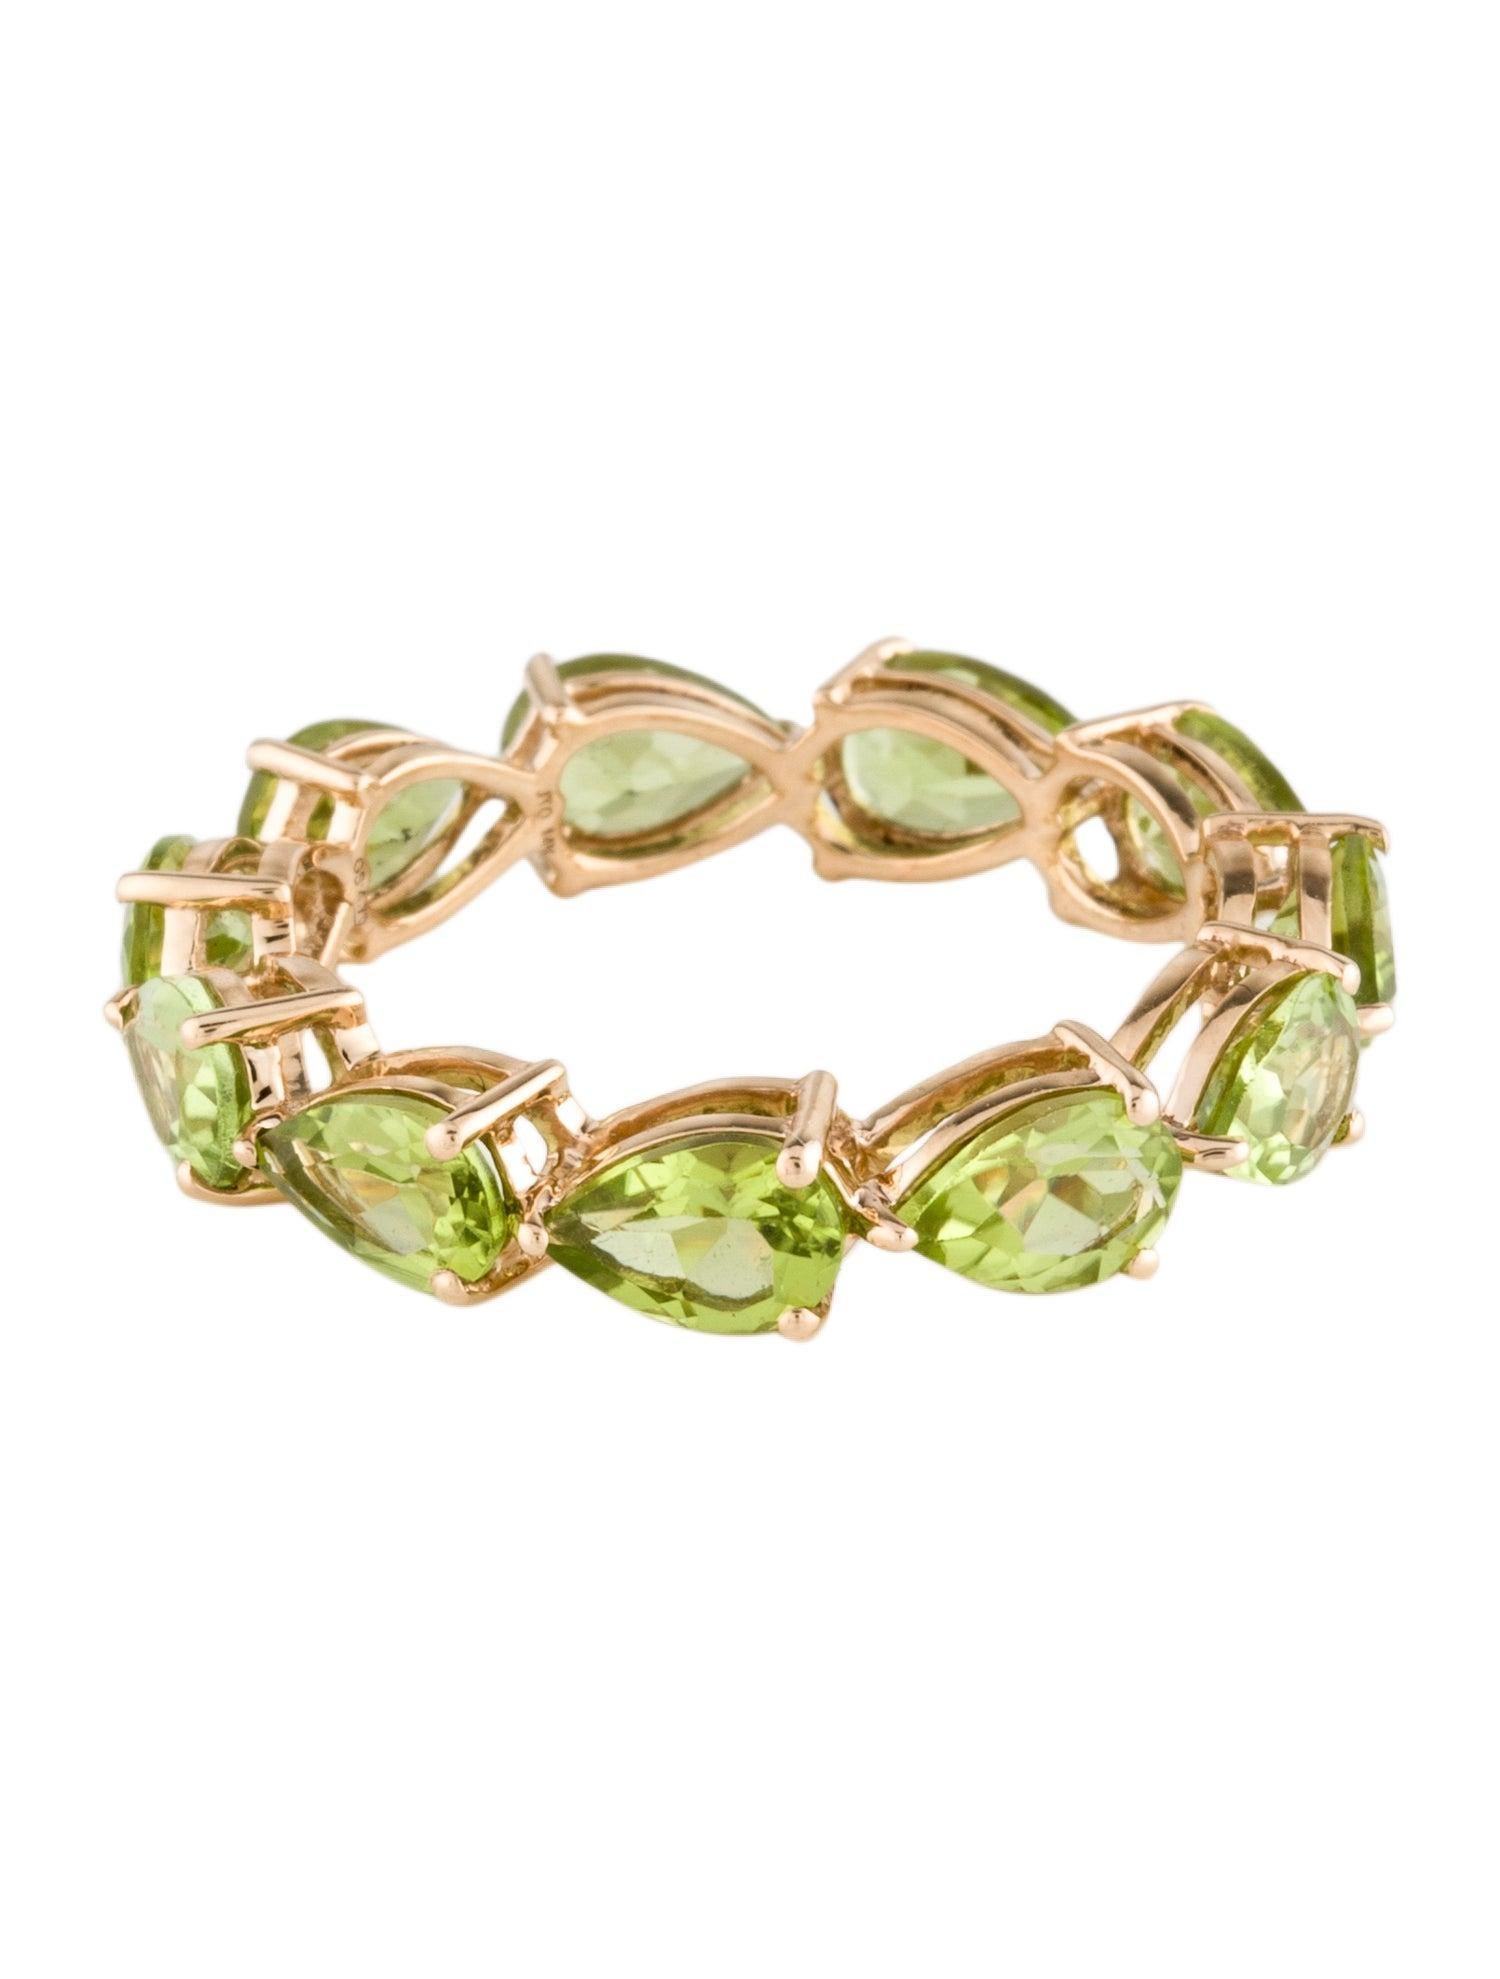 Pear Cut 14K Yellow Gold 4.70ctw Pear Modified Brilliant Peridot Eternity Band, Size 7.75 For Sale